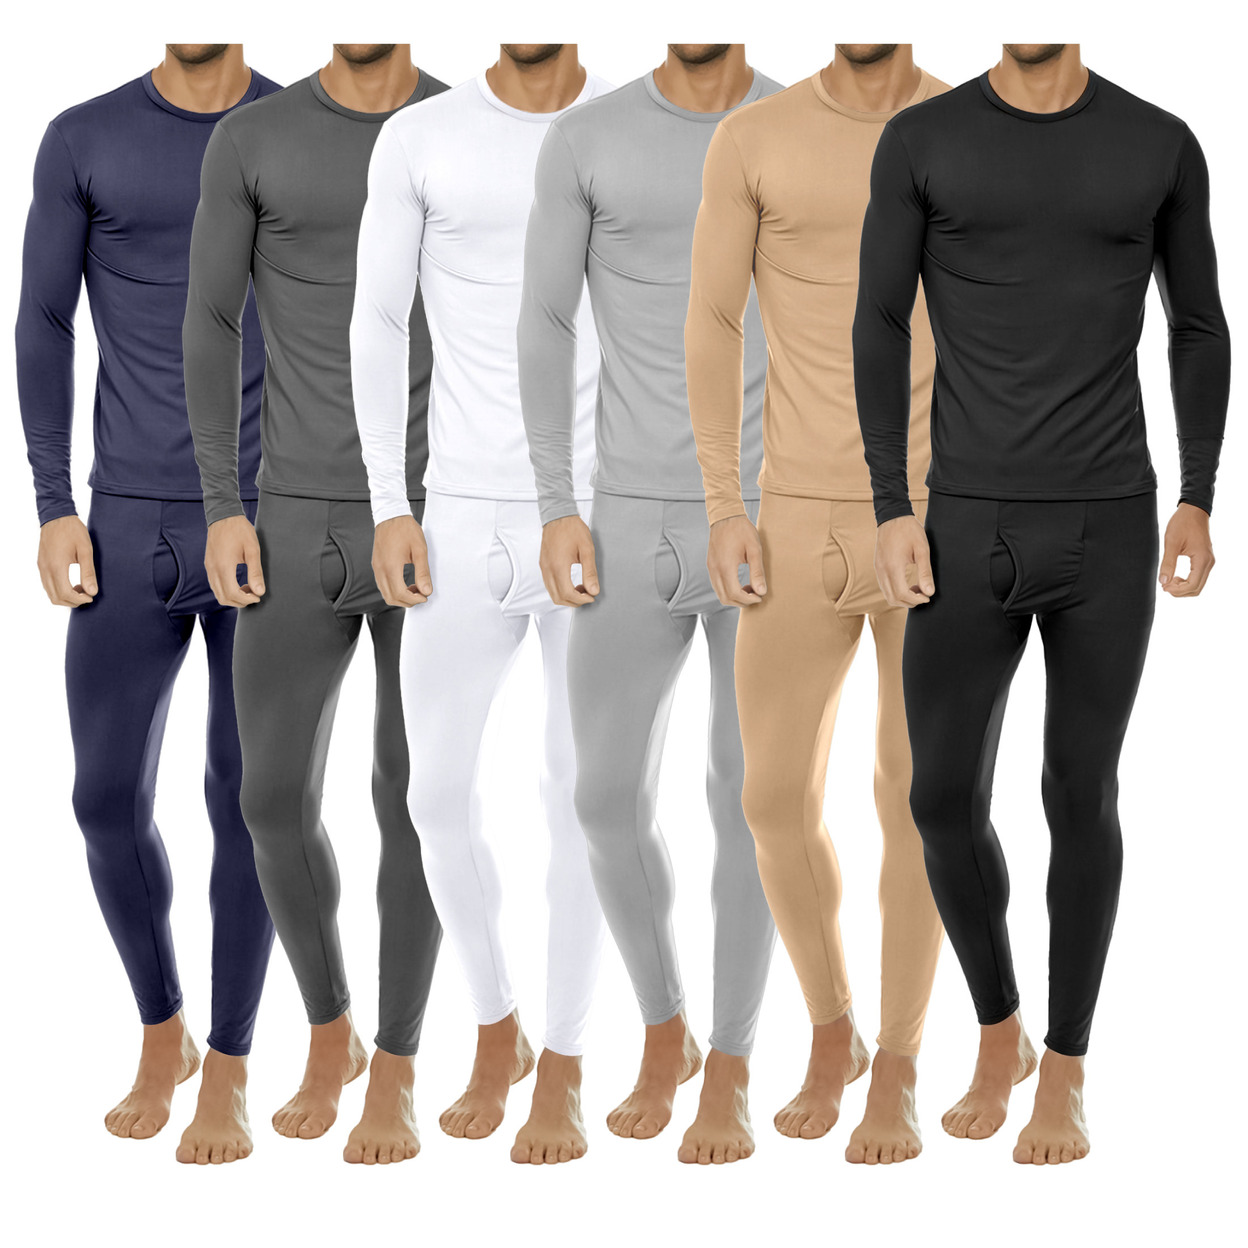 2-Pieces: Men's Winter Warm Fleece Lined Thermal Underwear Set For Cold Weather - Navy, Small